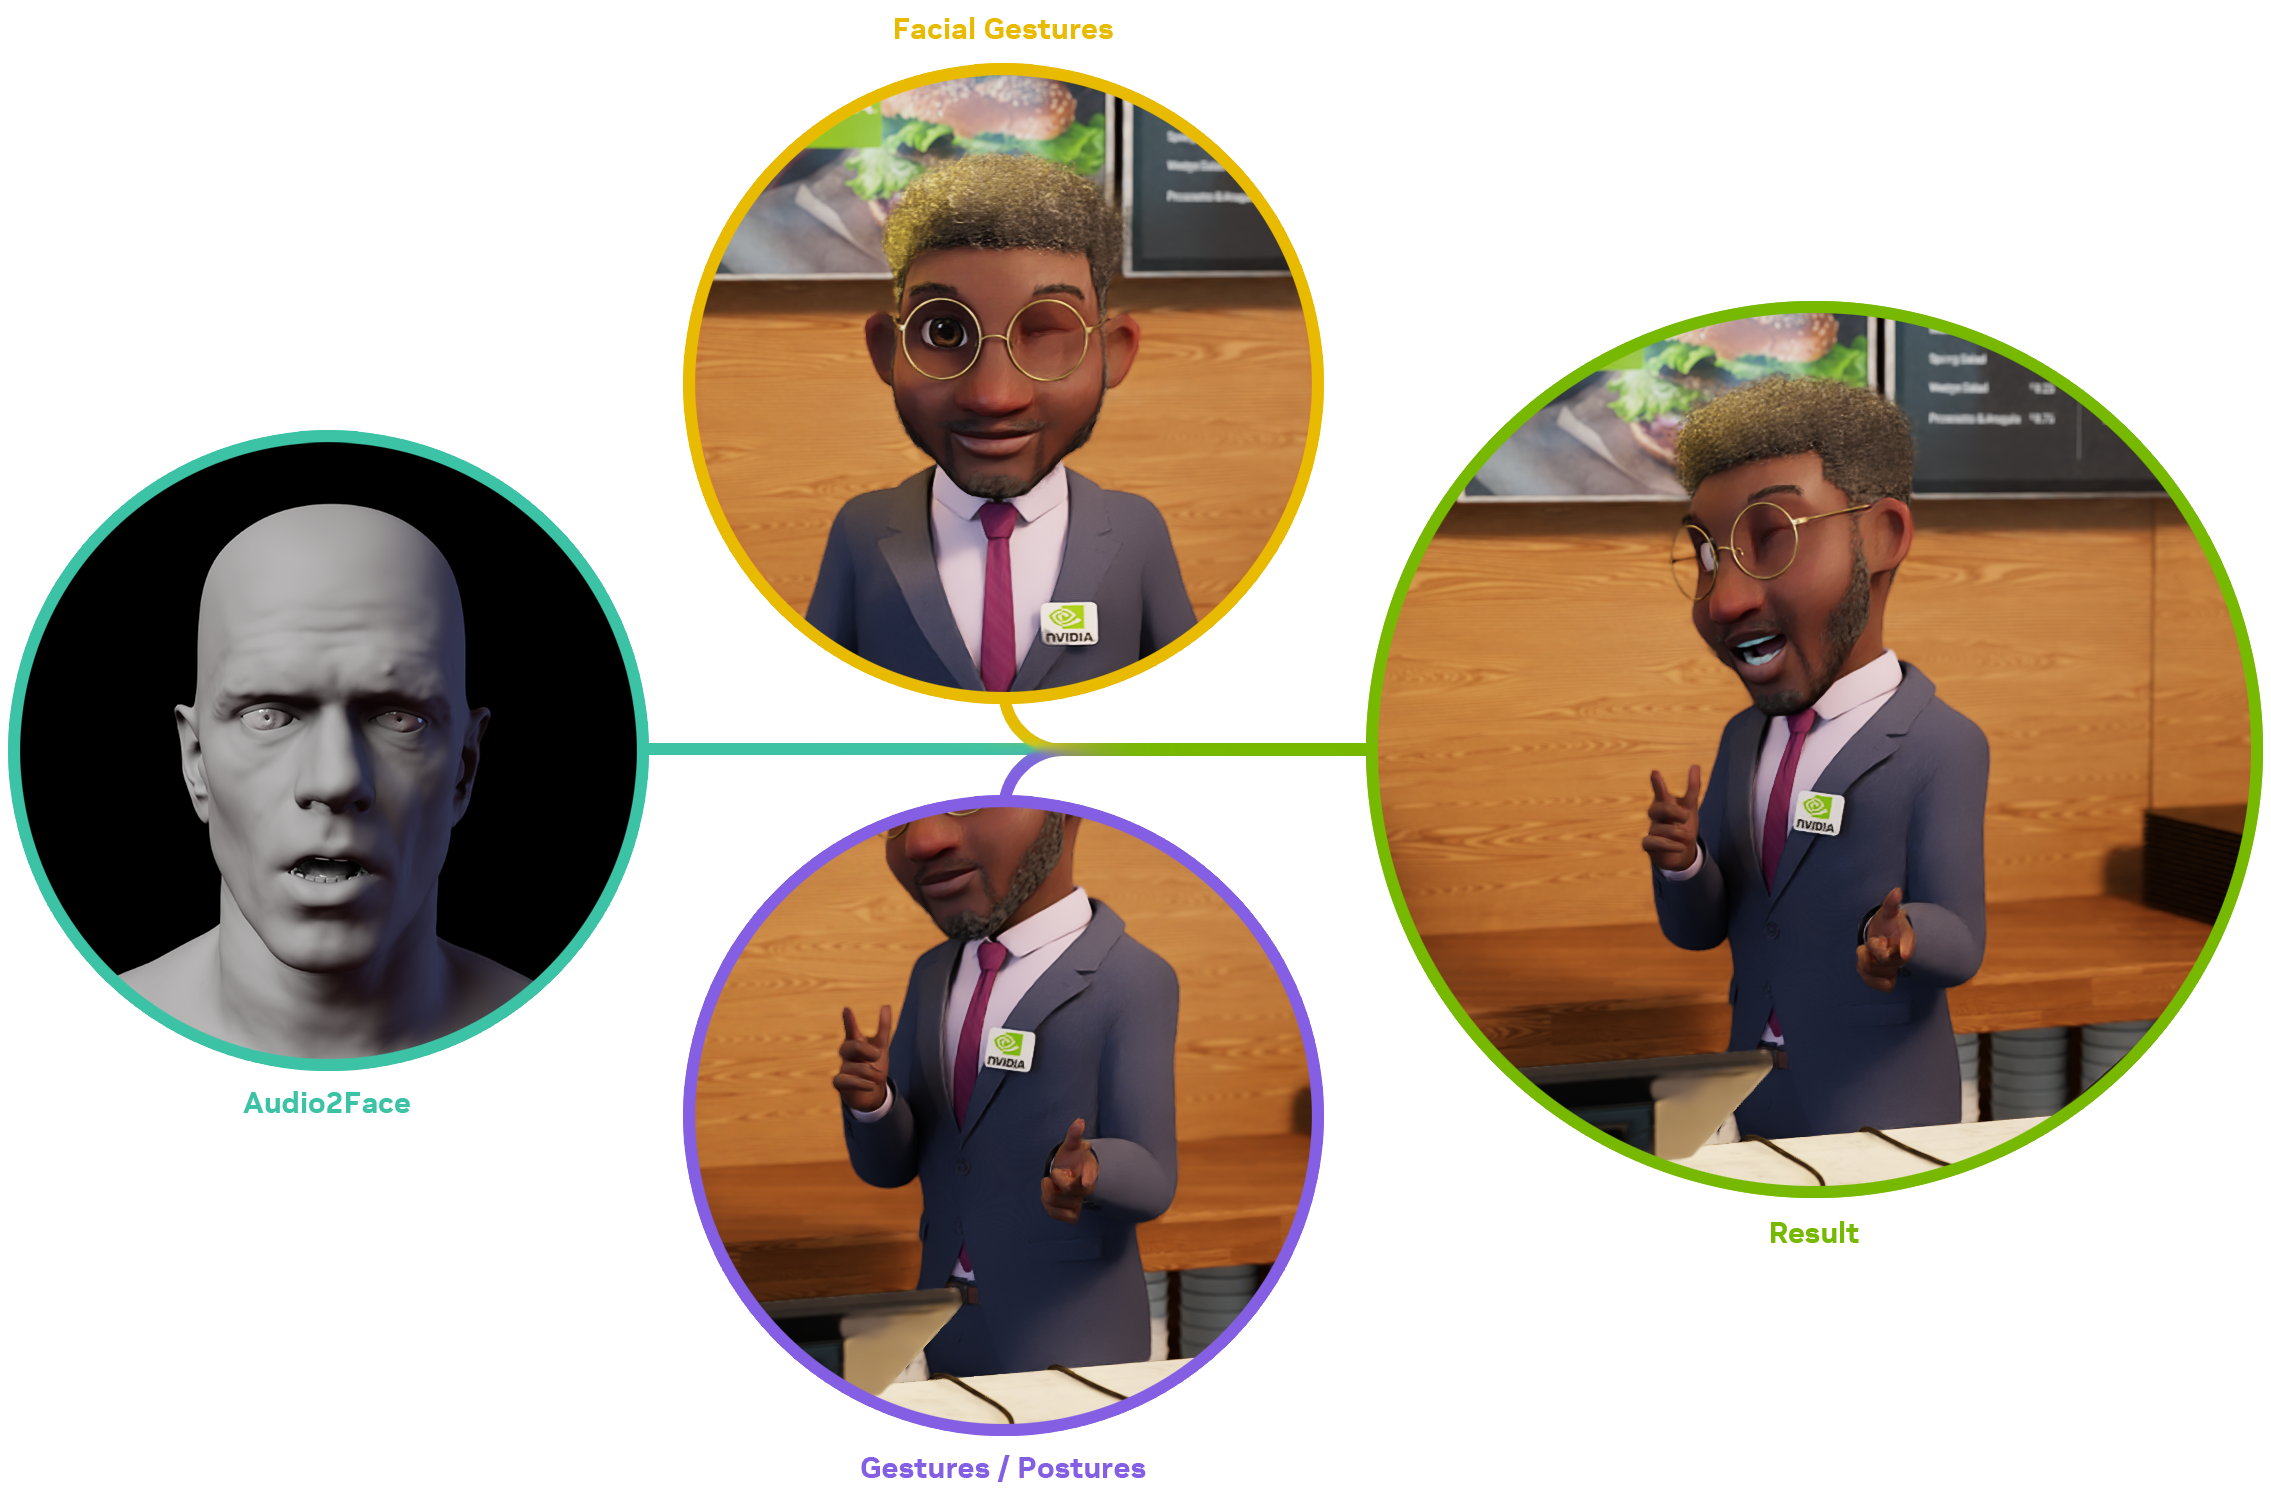 The animation pipeline provides an end-to-end pipeline including facial animation, body animation, and rendering.